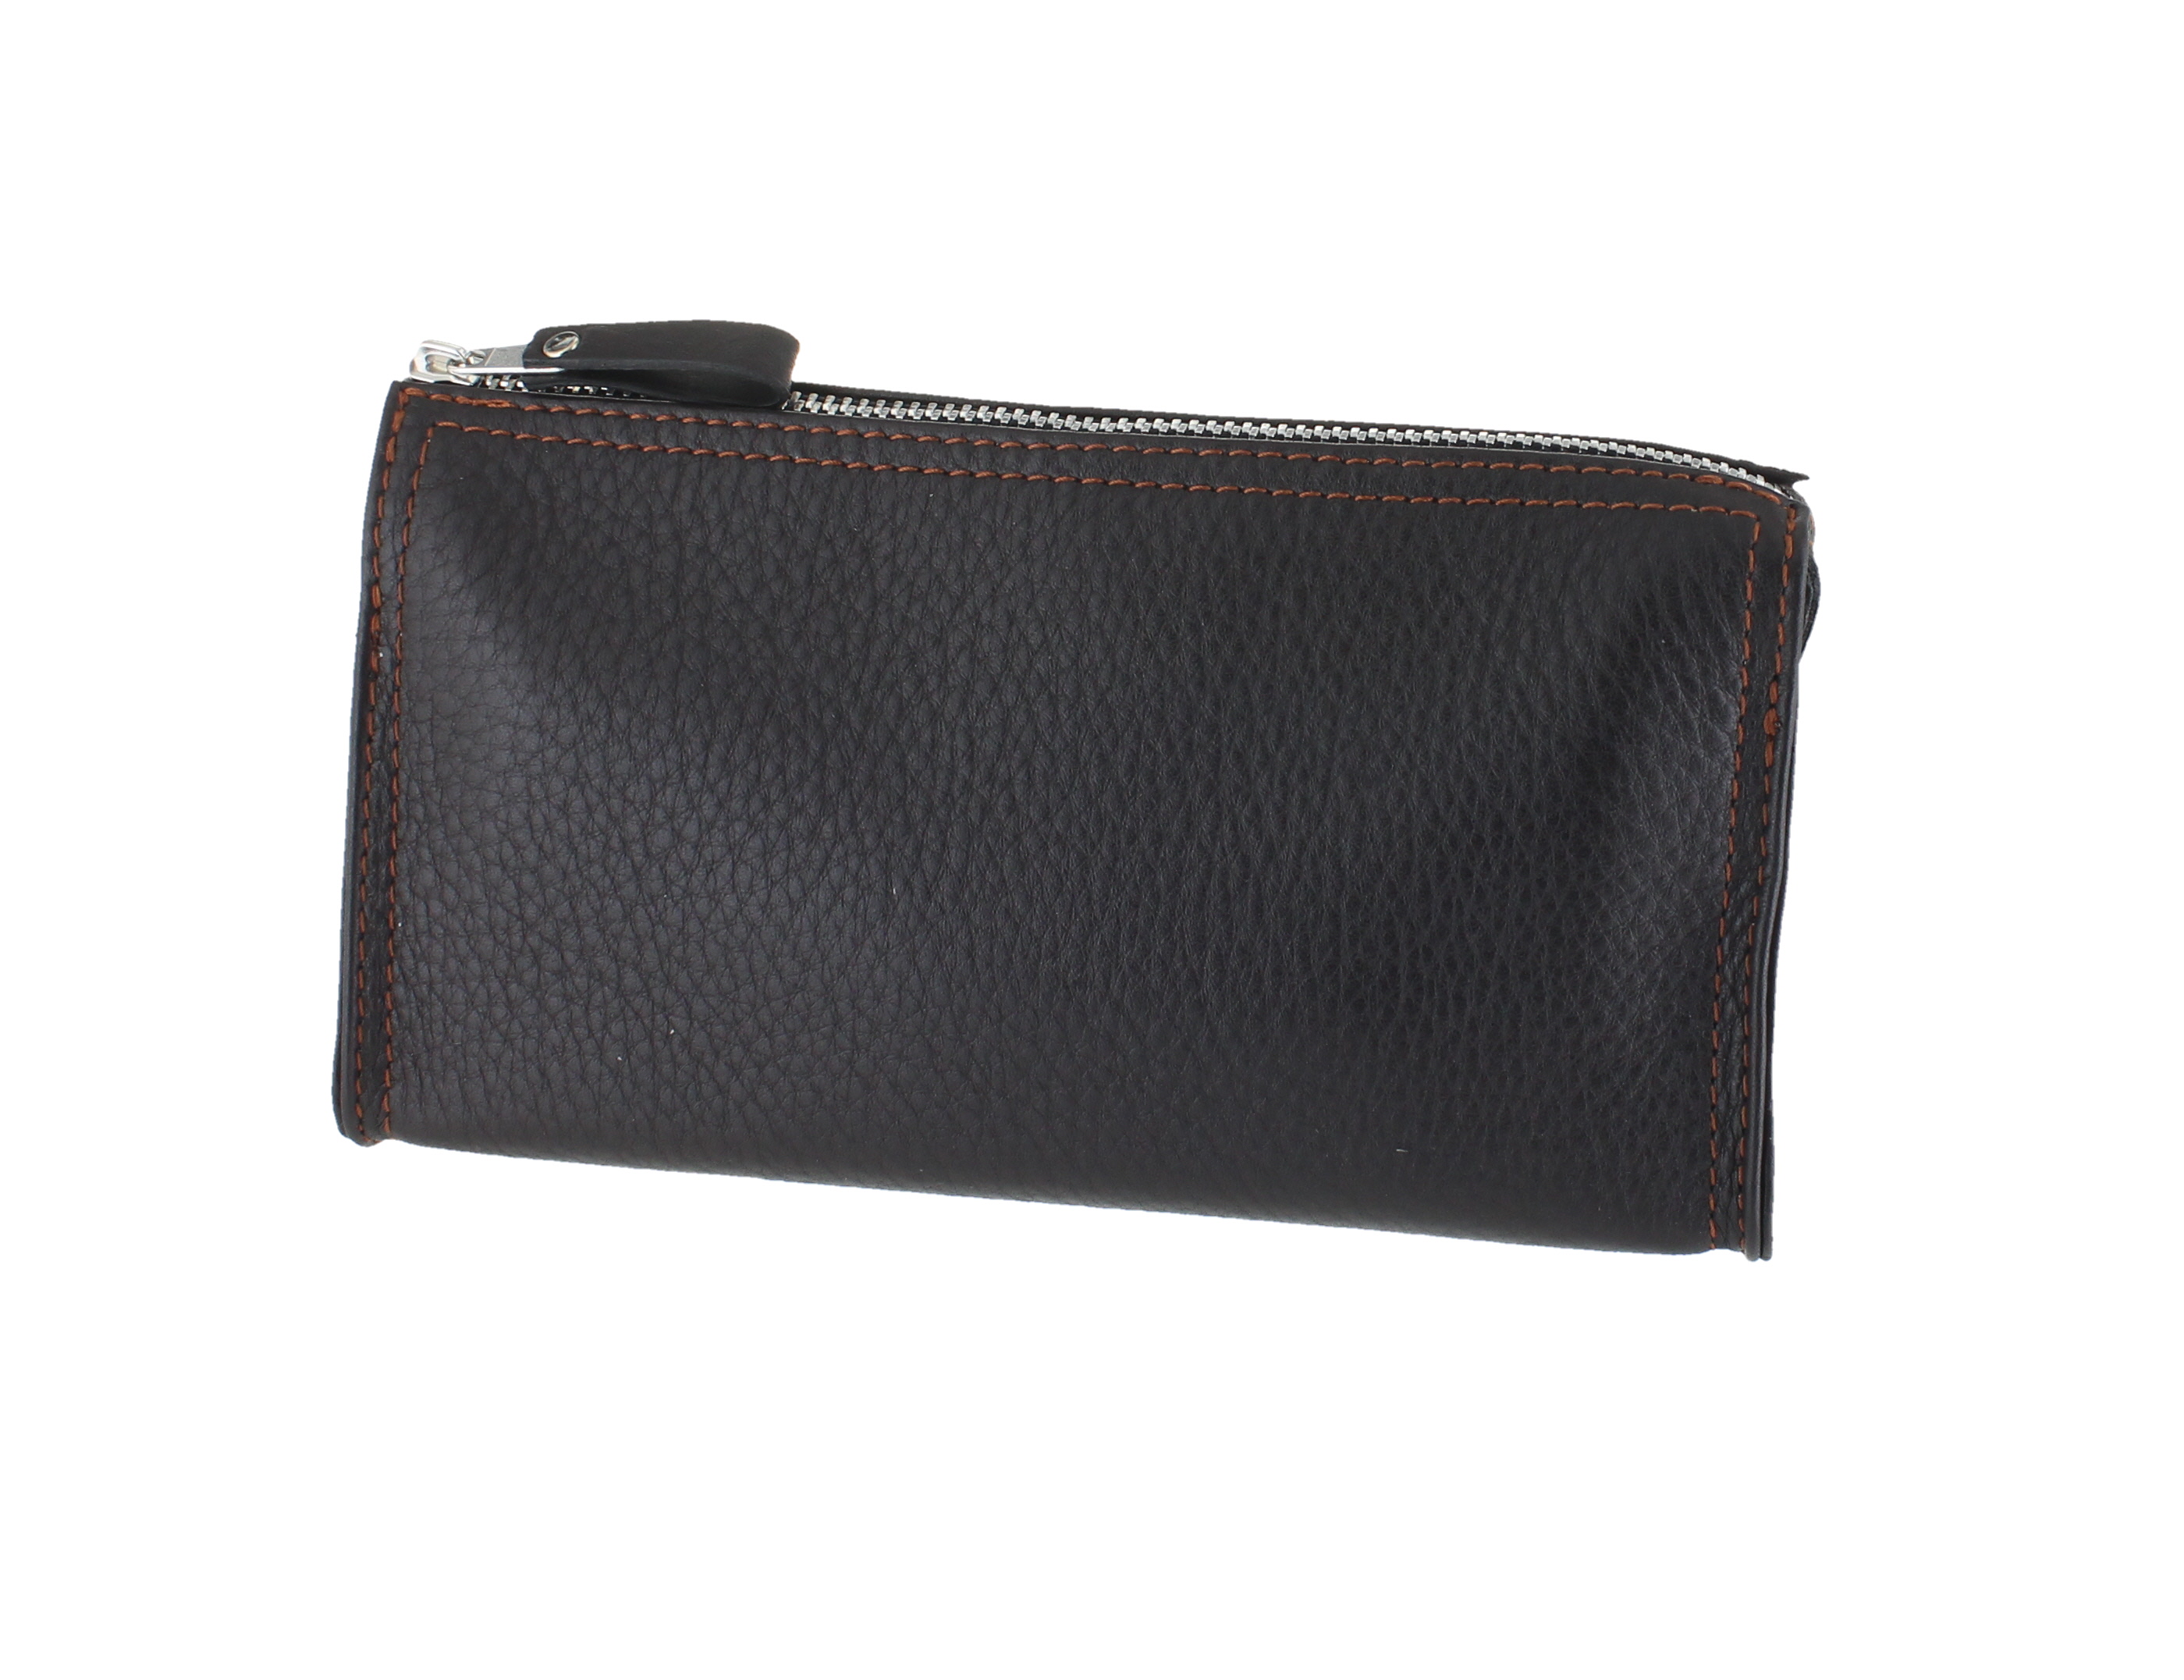 D. R. Harris Small Brown Leather Wash Bag